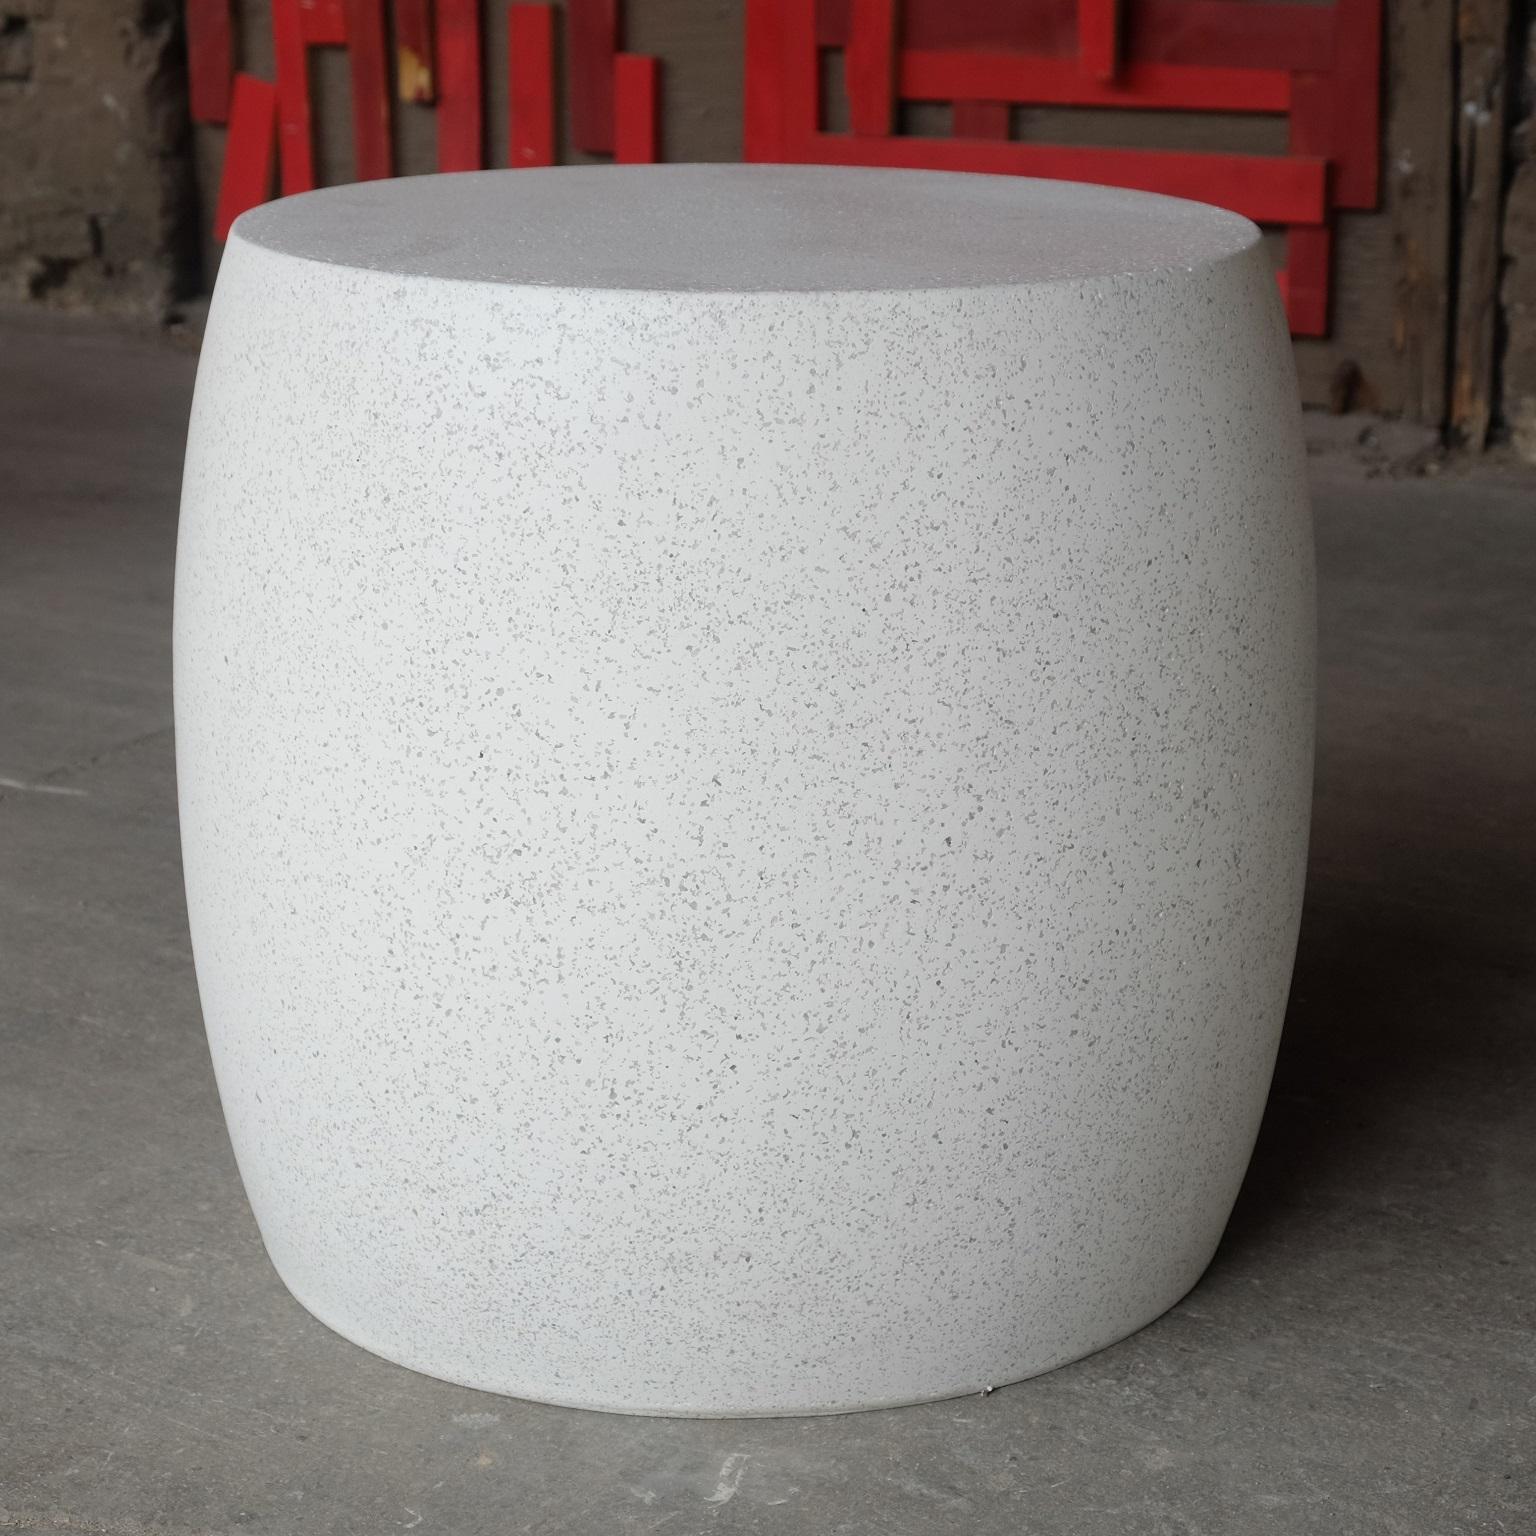 Versatility and elegance distilled into simplicity.

Measures: Diameter 20 in. (50.8 cm), height 18 in. (45.7 cm), Weight 20 lbs. (9 kg)

Finish color options:
white stone (shown)
natural stone
aged stone
keystone
coal stone

Materials: